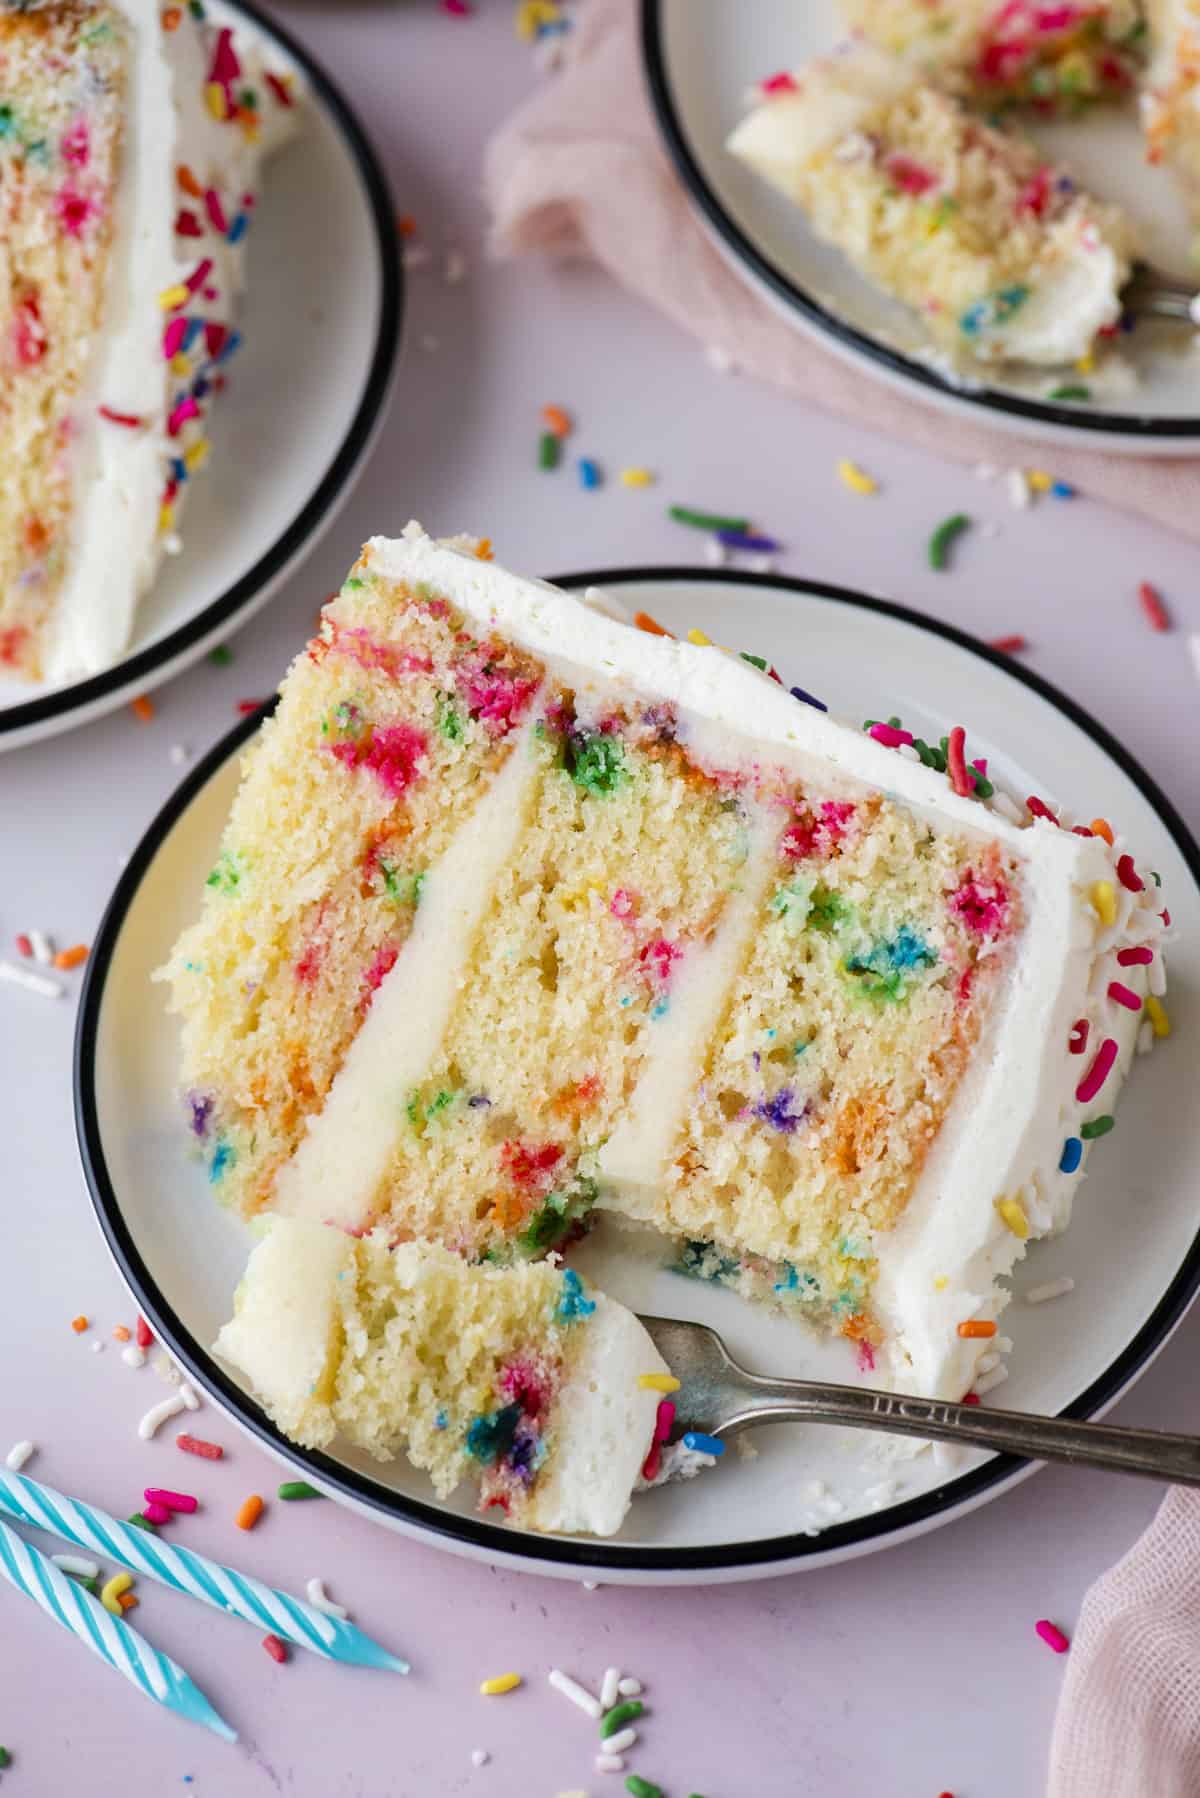 Funfetti cake on three small white plates sitting on a pink surface, with forks that have removed bites of cake from the slice and sprinkles and two blue birthday candles surrounding the plates